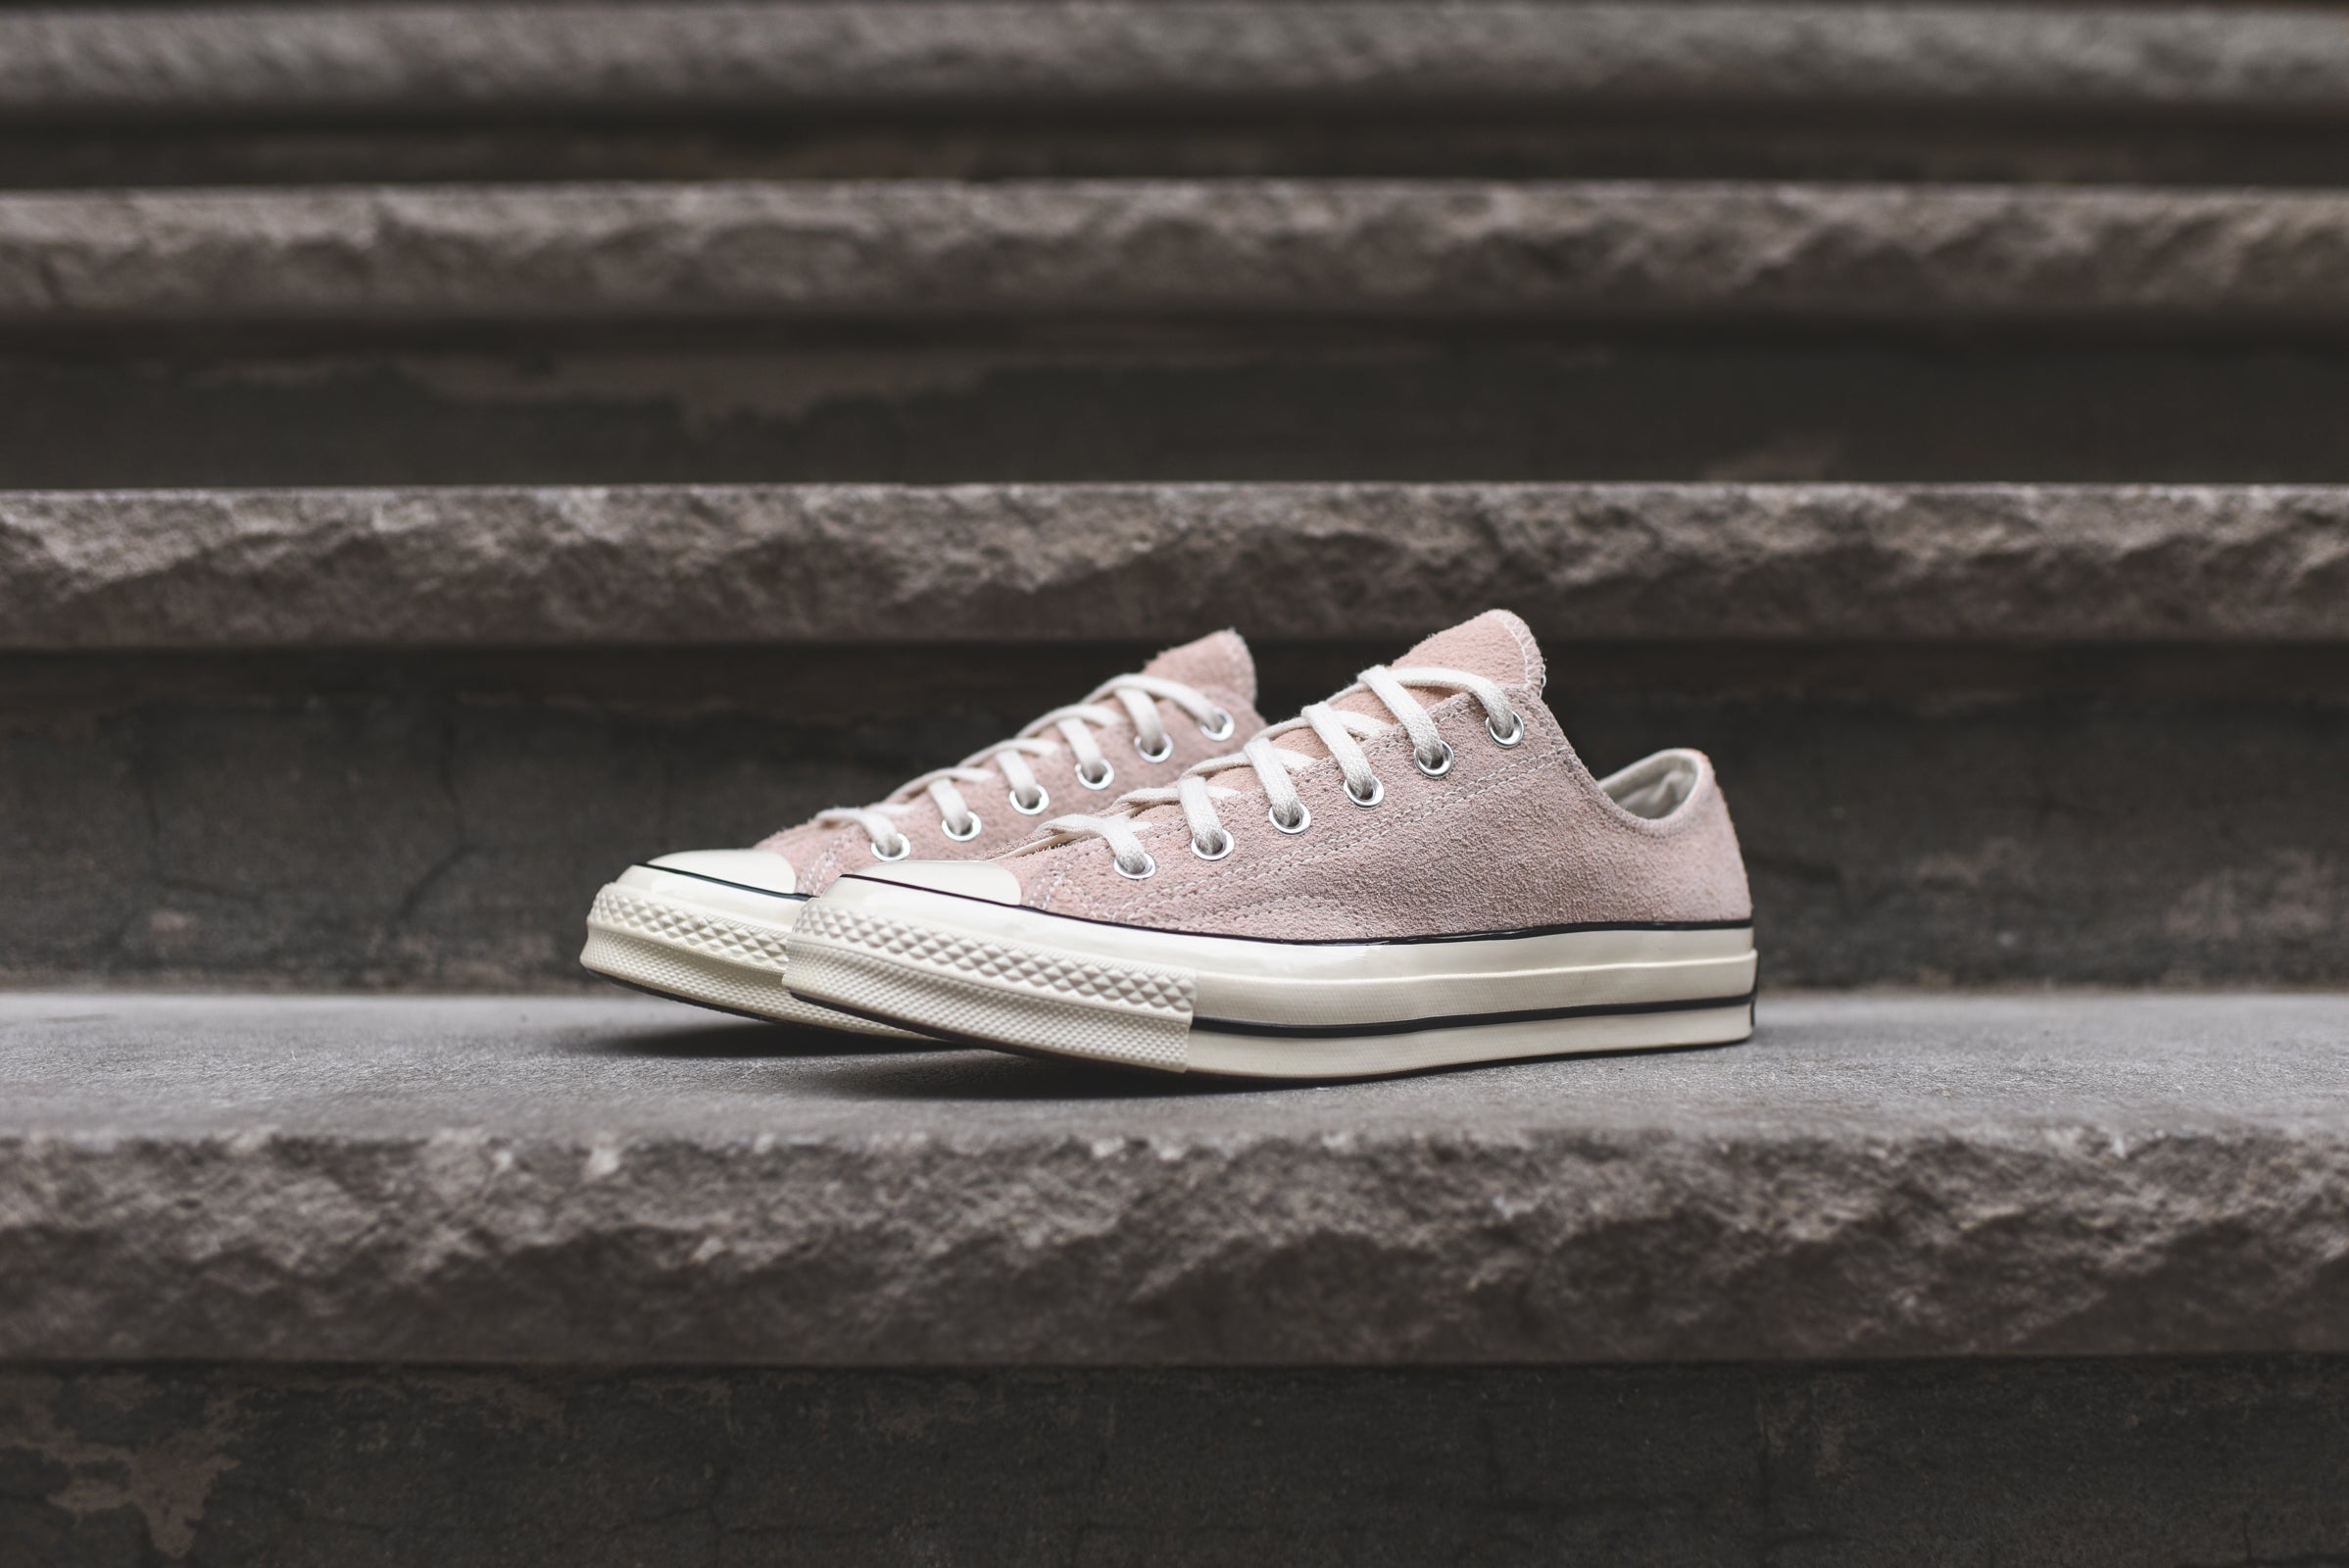 converse chuck taylor all star low 1970 vintage ox